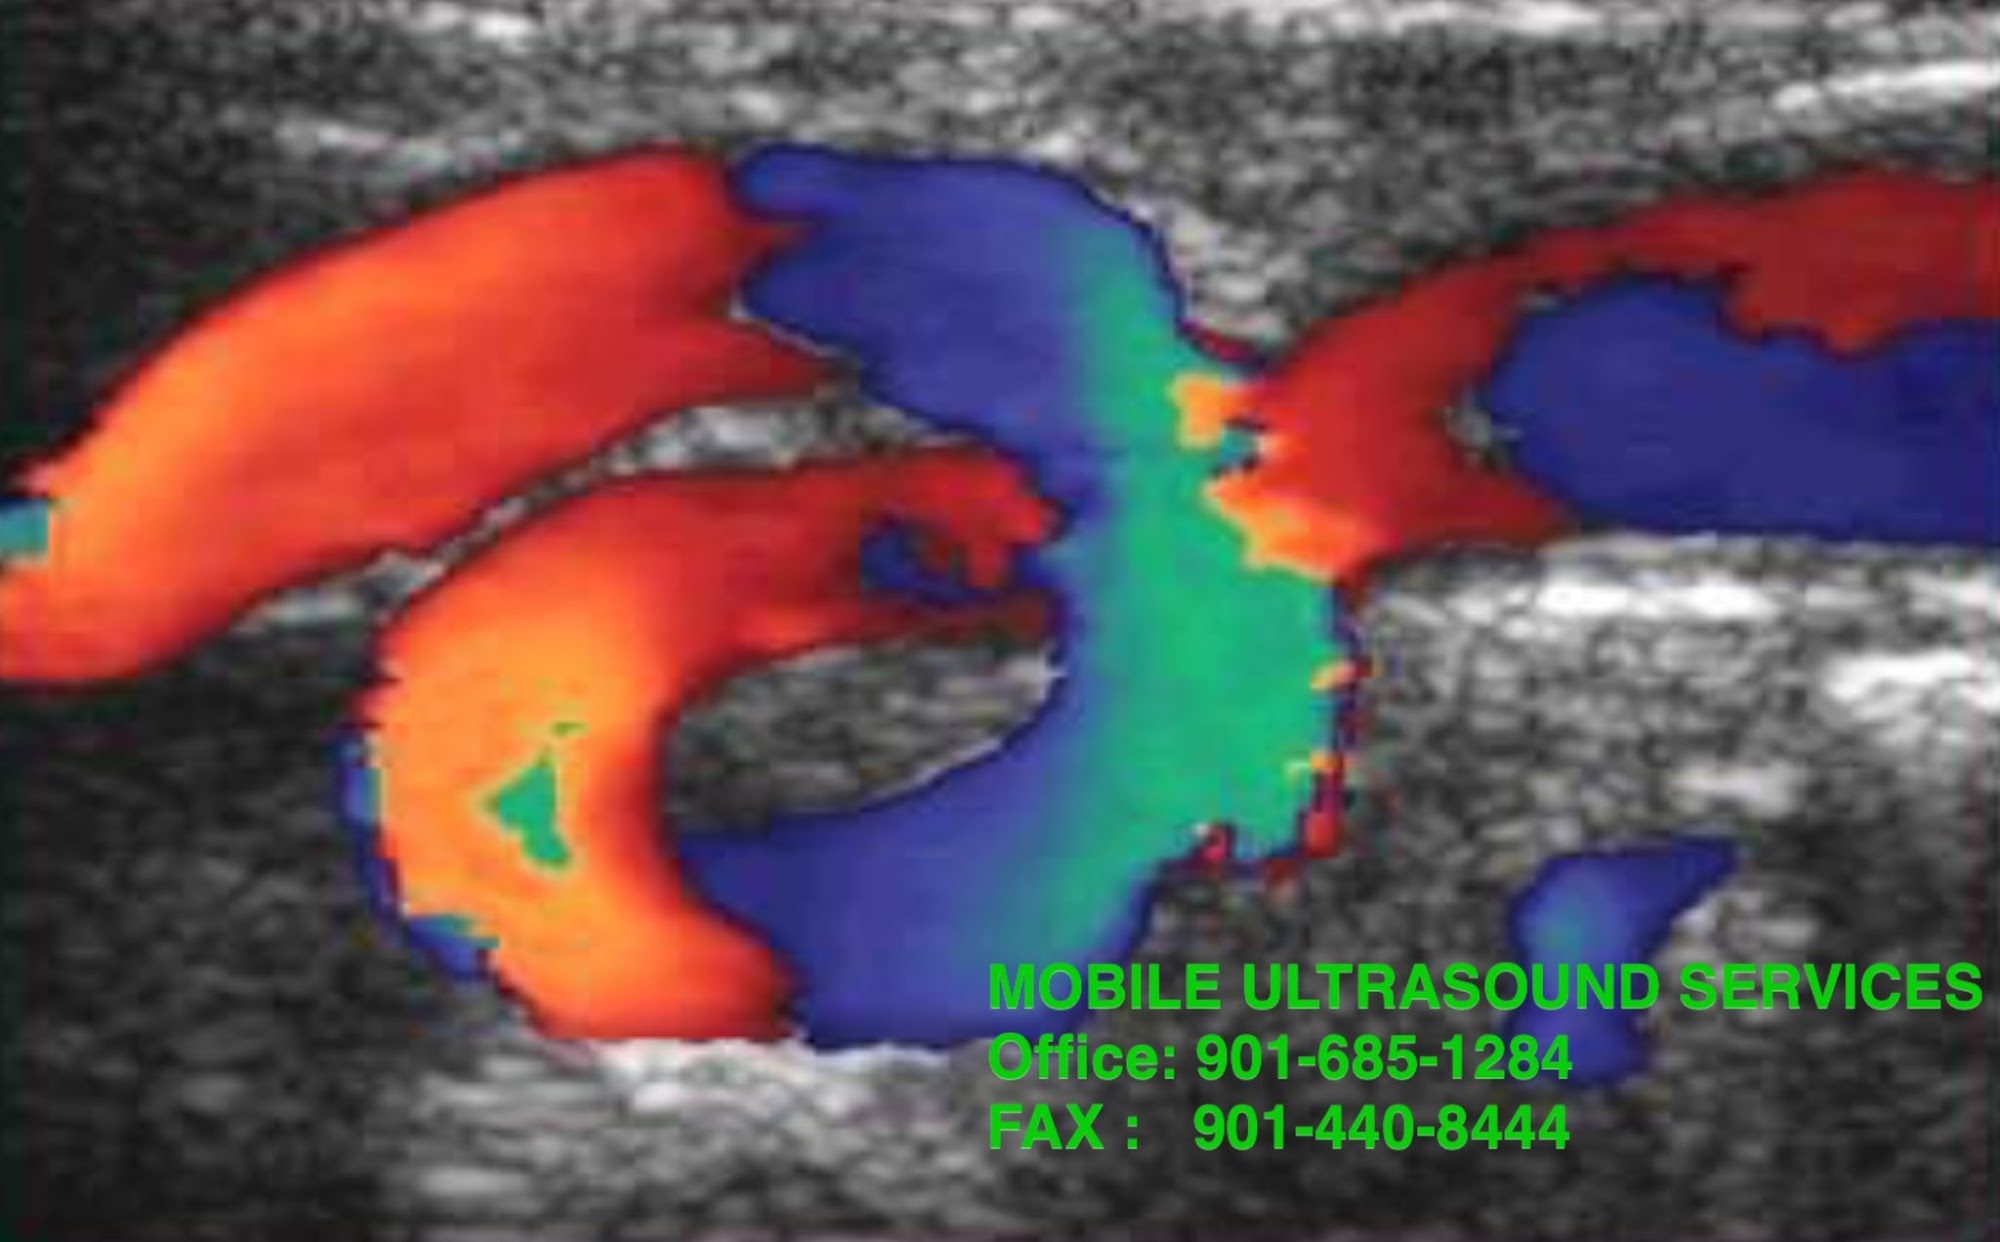 Mobile Ultrasound Services Inc